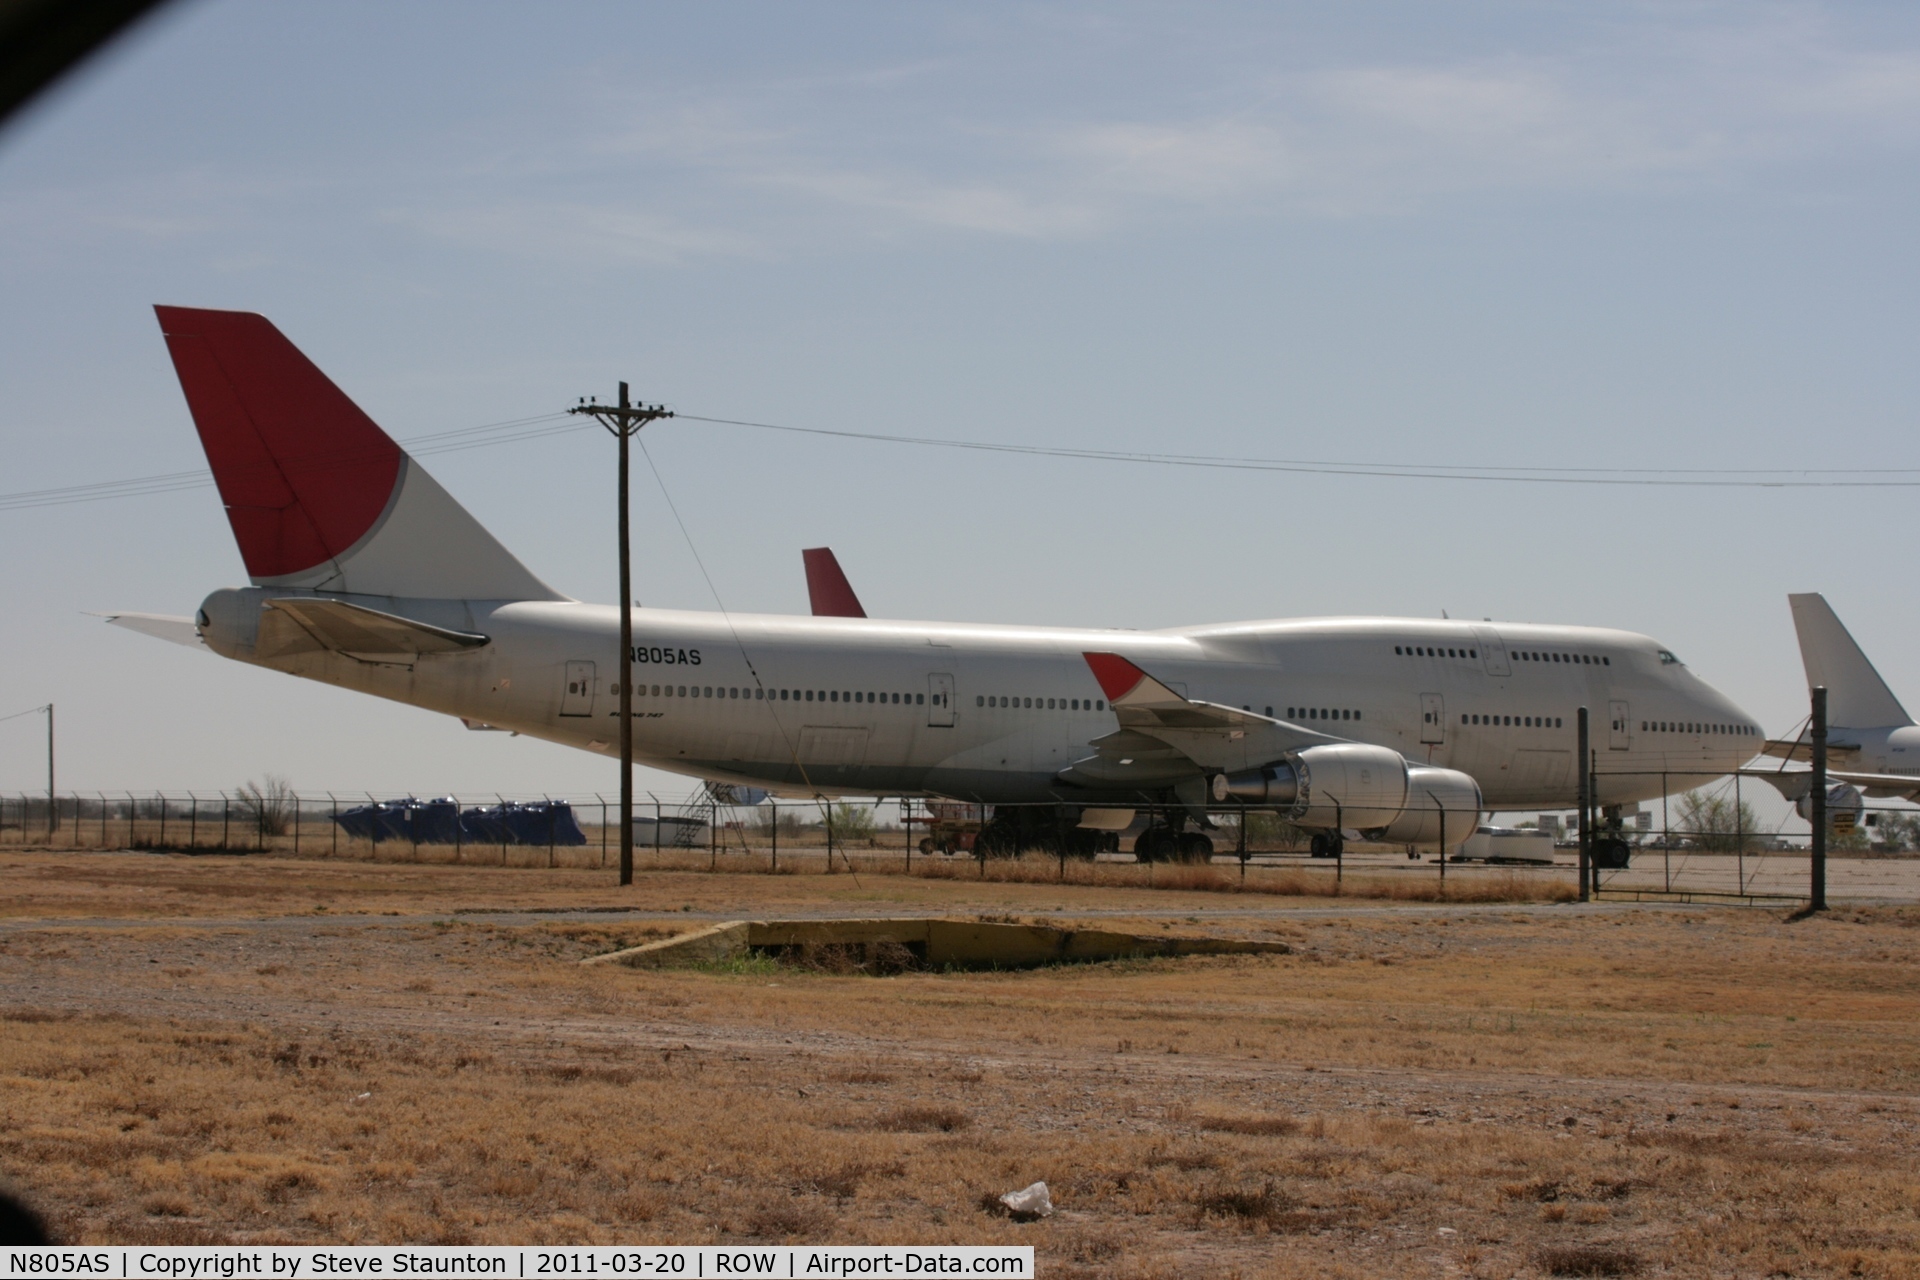 N805AS, , Taken at Roswell International Air Centre Storage Facility, New Mexico in March 2011 whilst on an Aeroprint Aviation tour